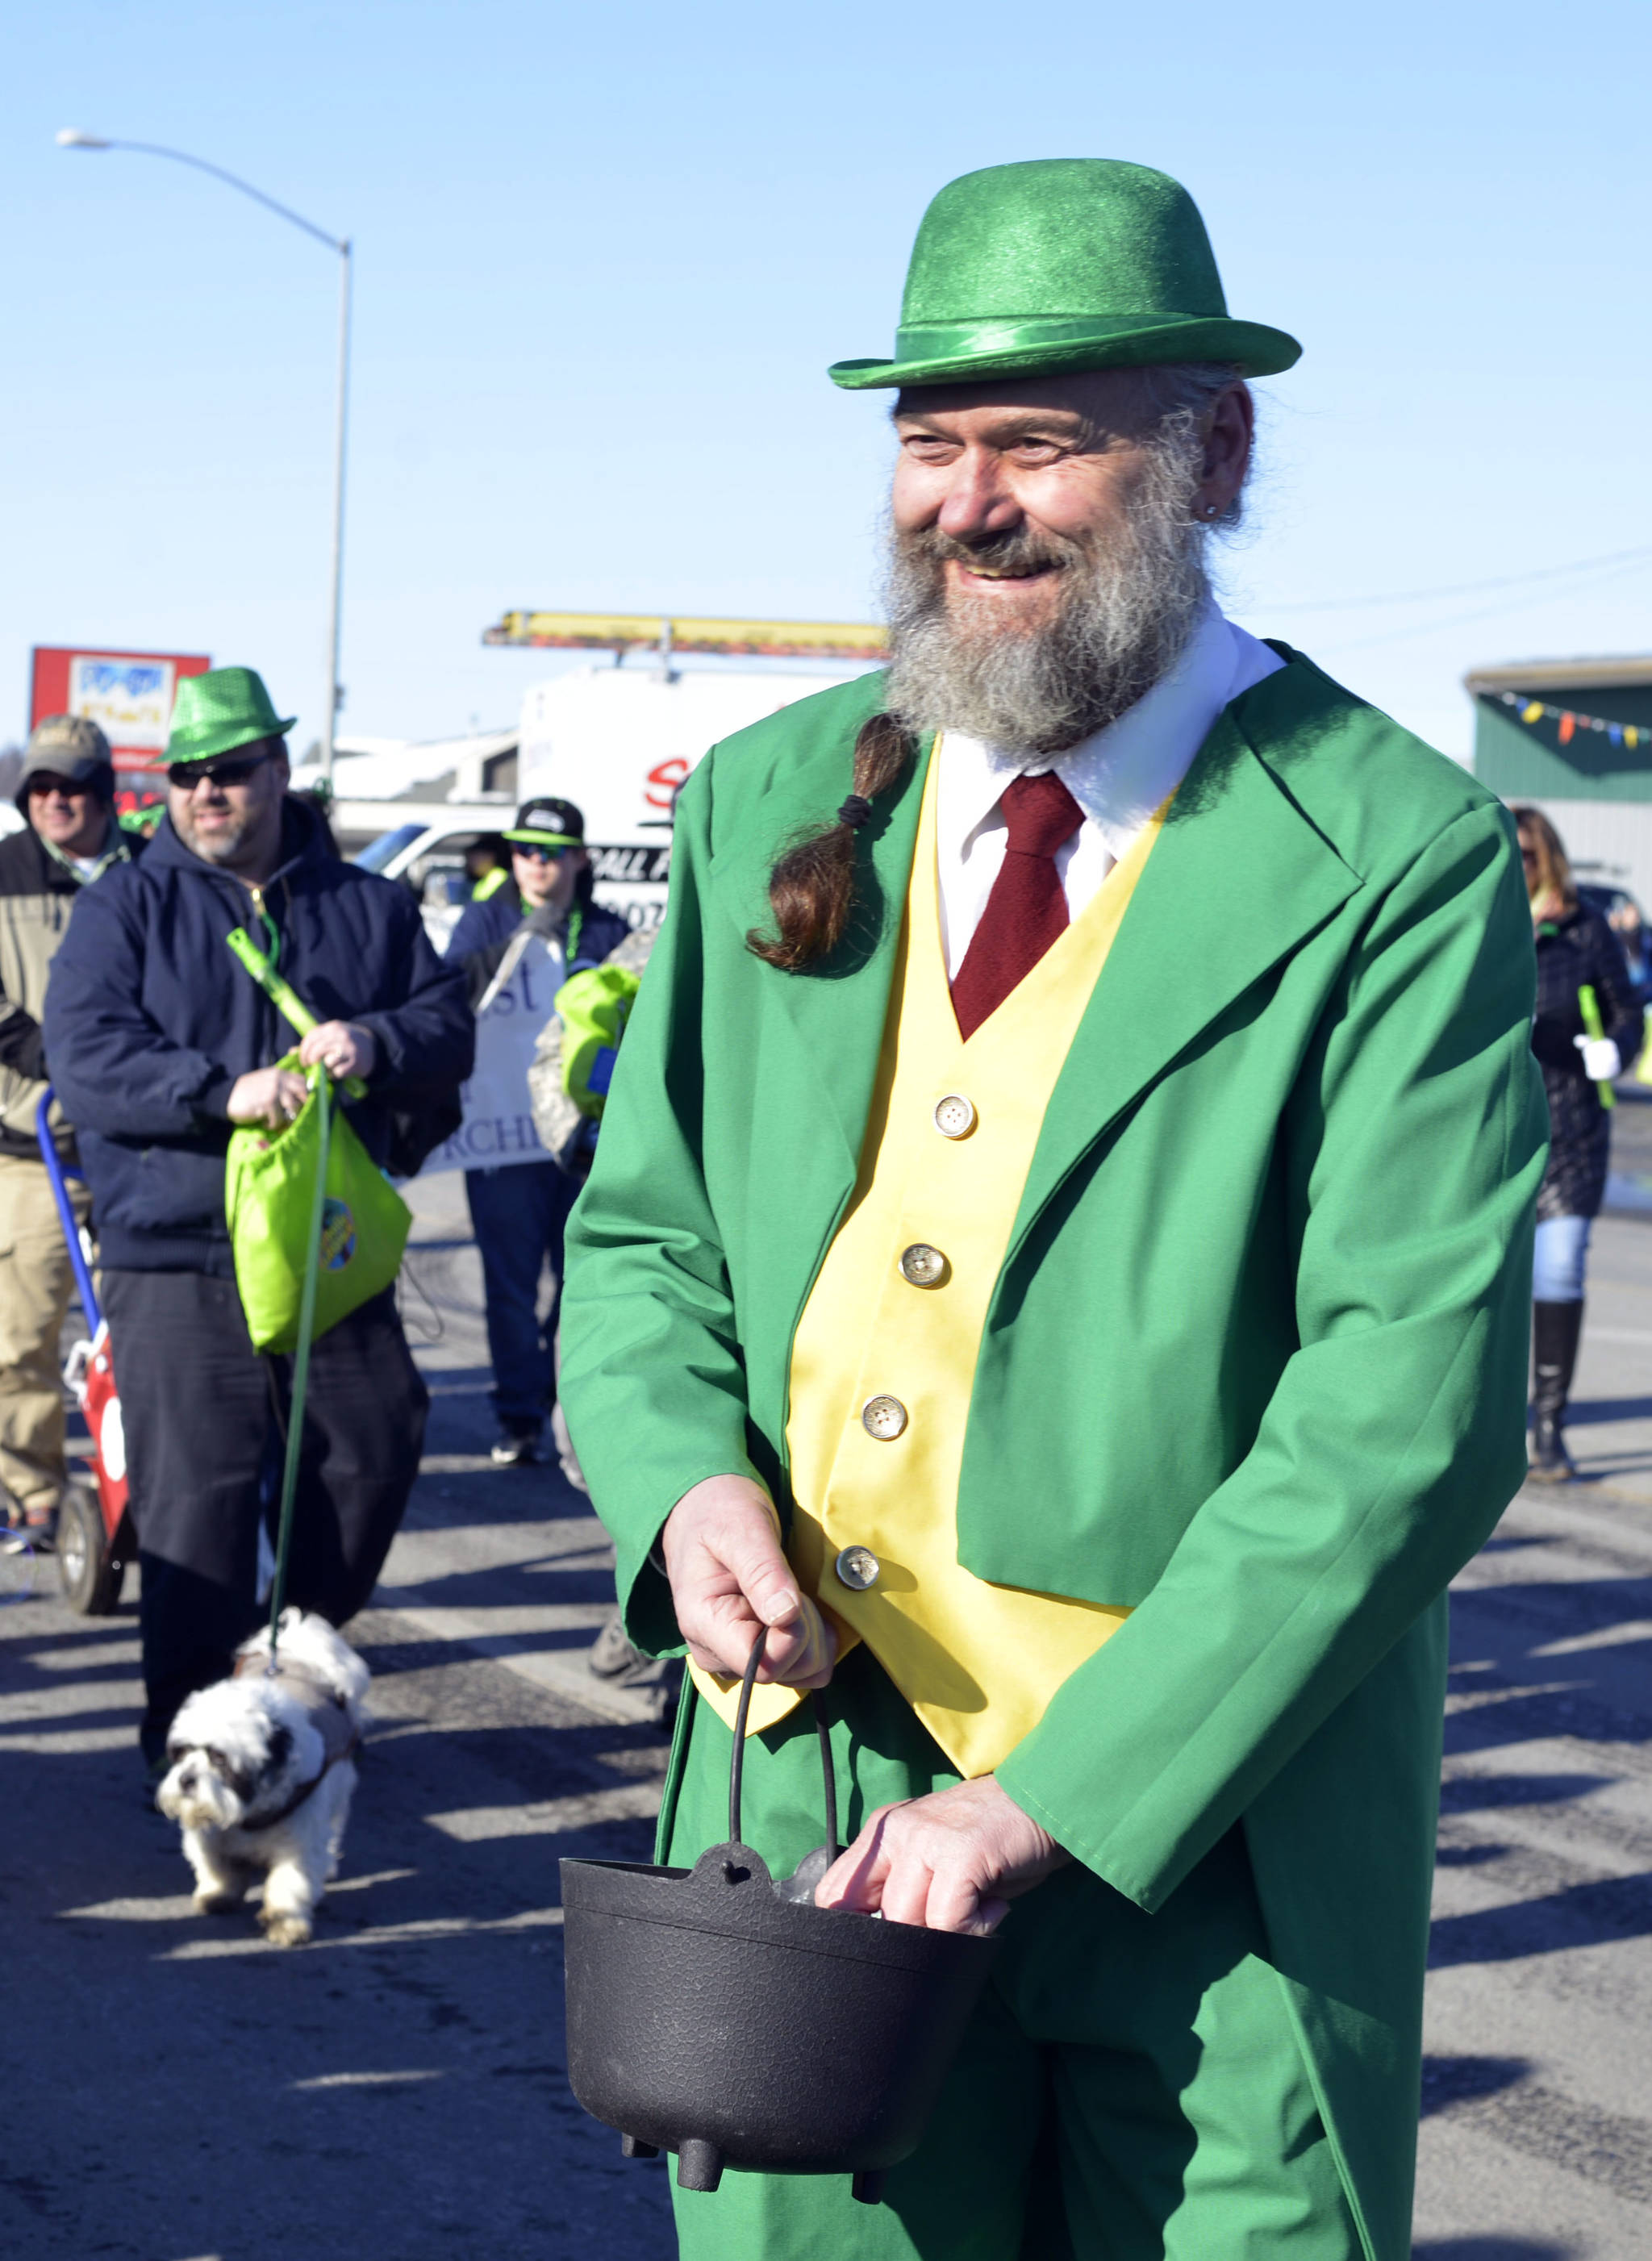 Tom Redmond distributed candy to parade goers at the Soldotna St. Paddy’s Day Parade on Friday, March 17, 2017 in Soldotna, Alaska. The parade has become a family tradition, with three generations of the Redmond family attending each year. (Kat Sorensen/Peninsula Clarion)